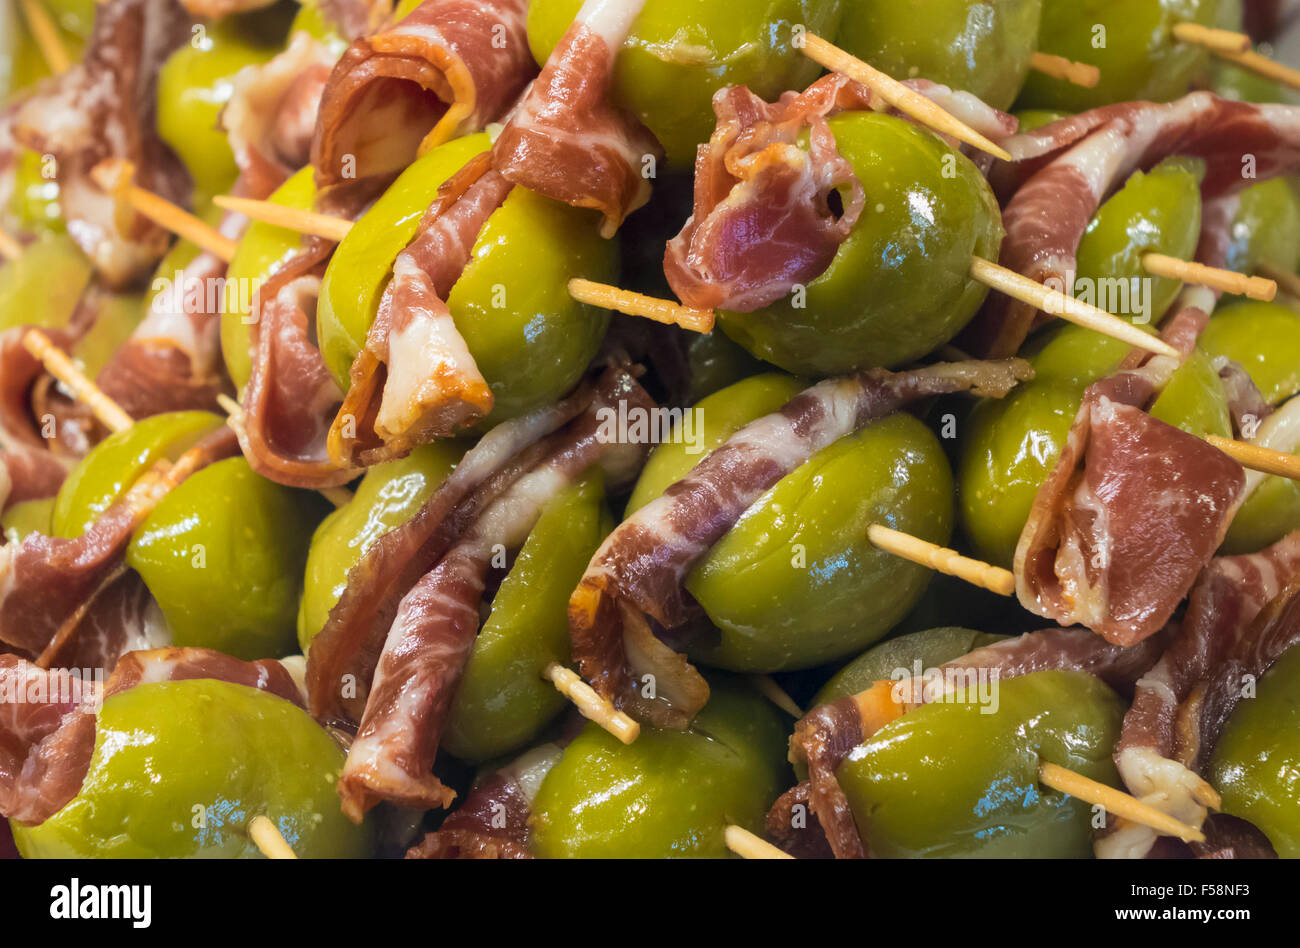 Green olives and Iberian ham or bacon on plate of hors-d'oeuvres or entradas in food counter in Spanish market in Madrid Stock Photo